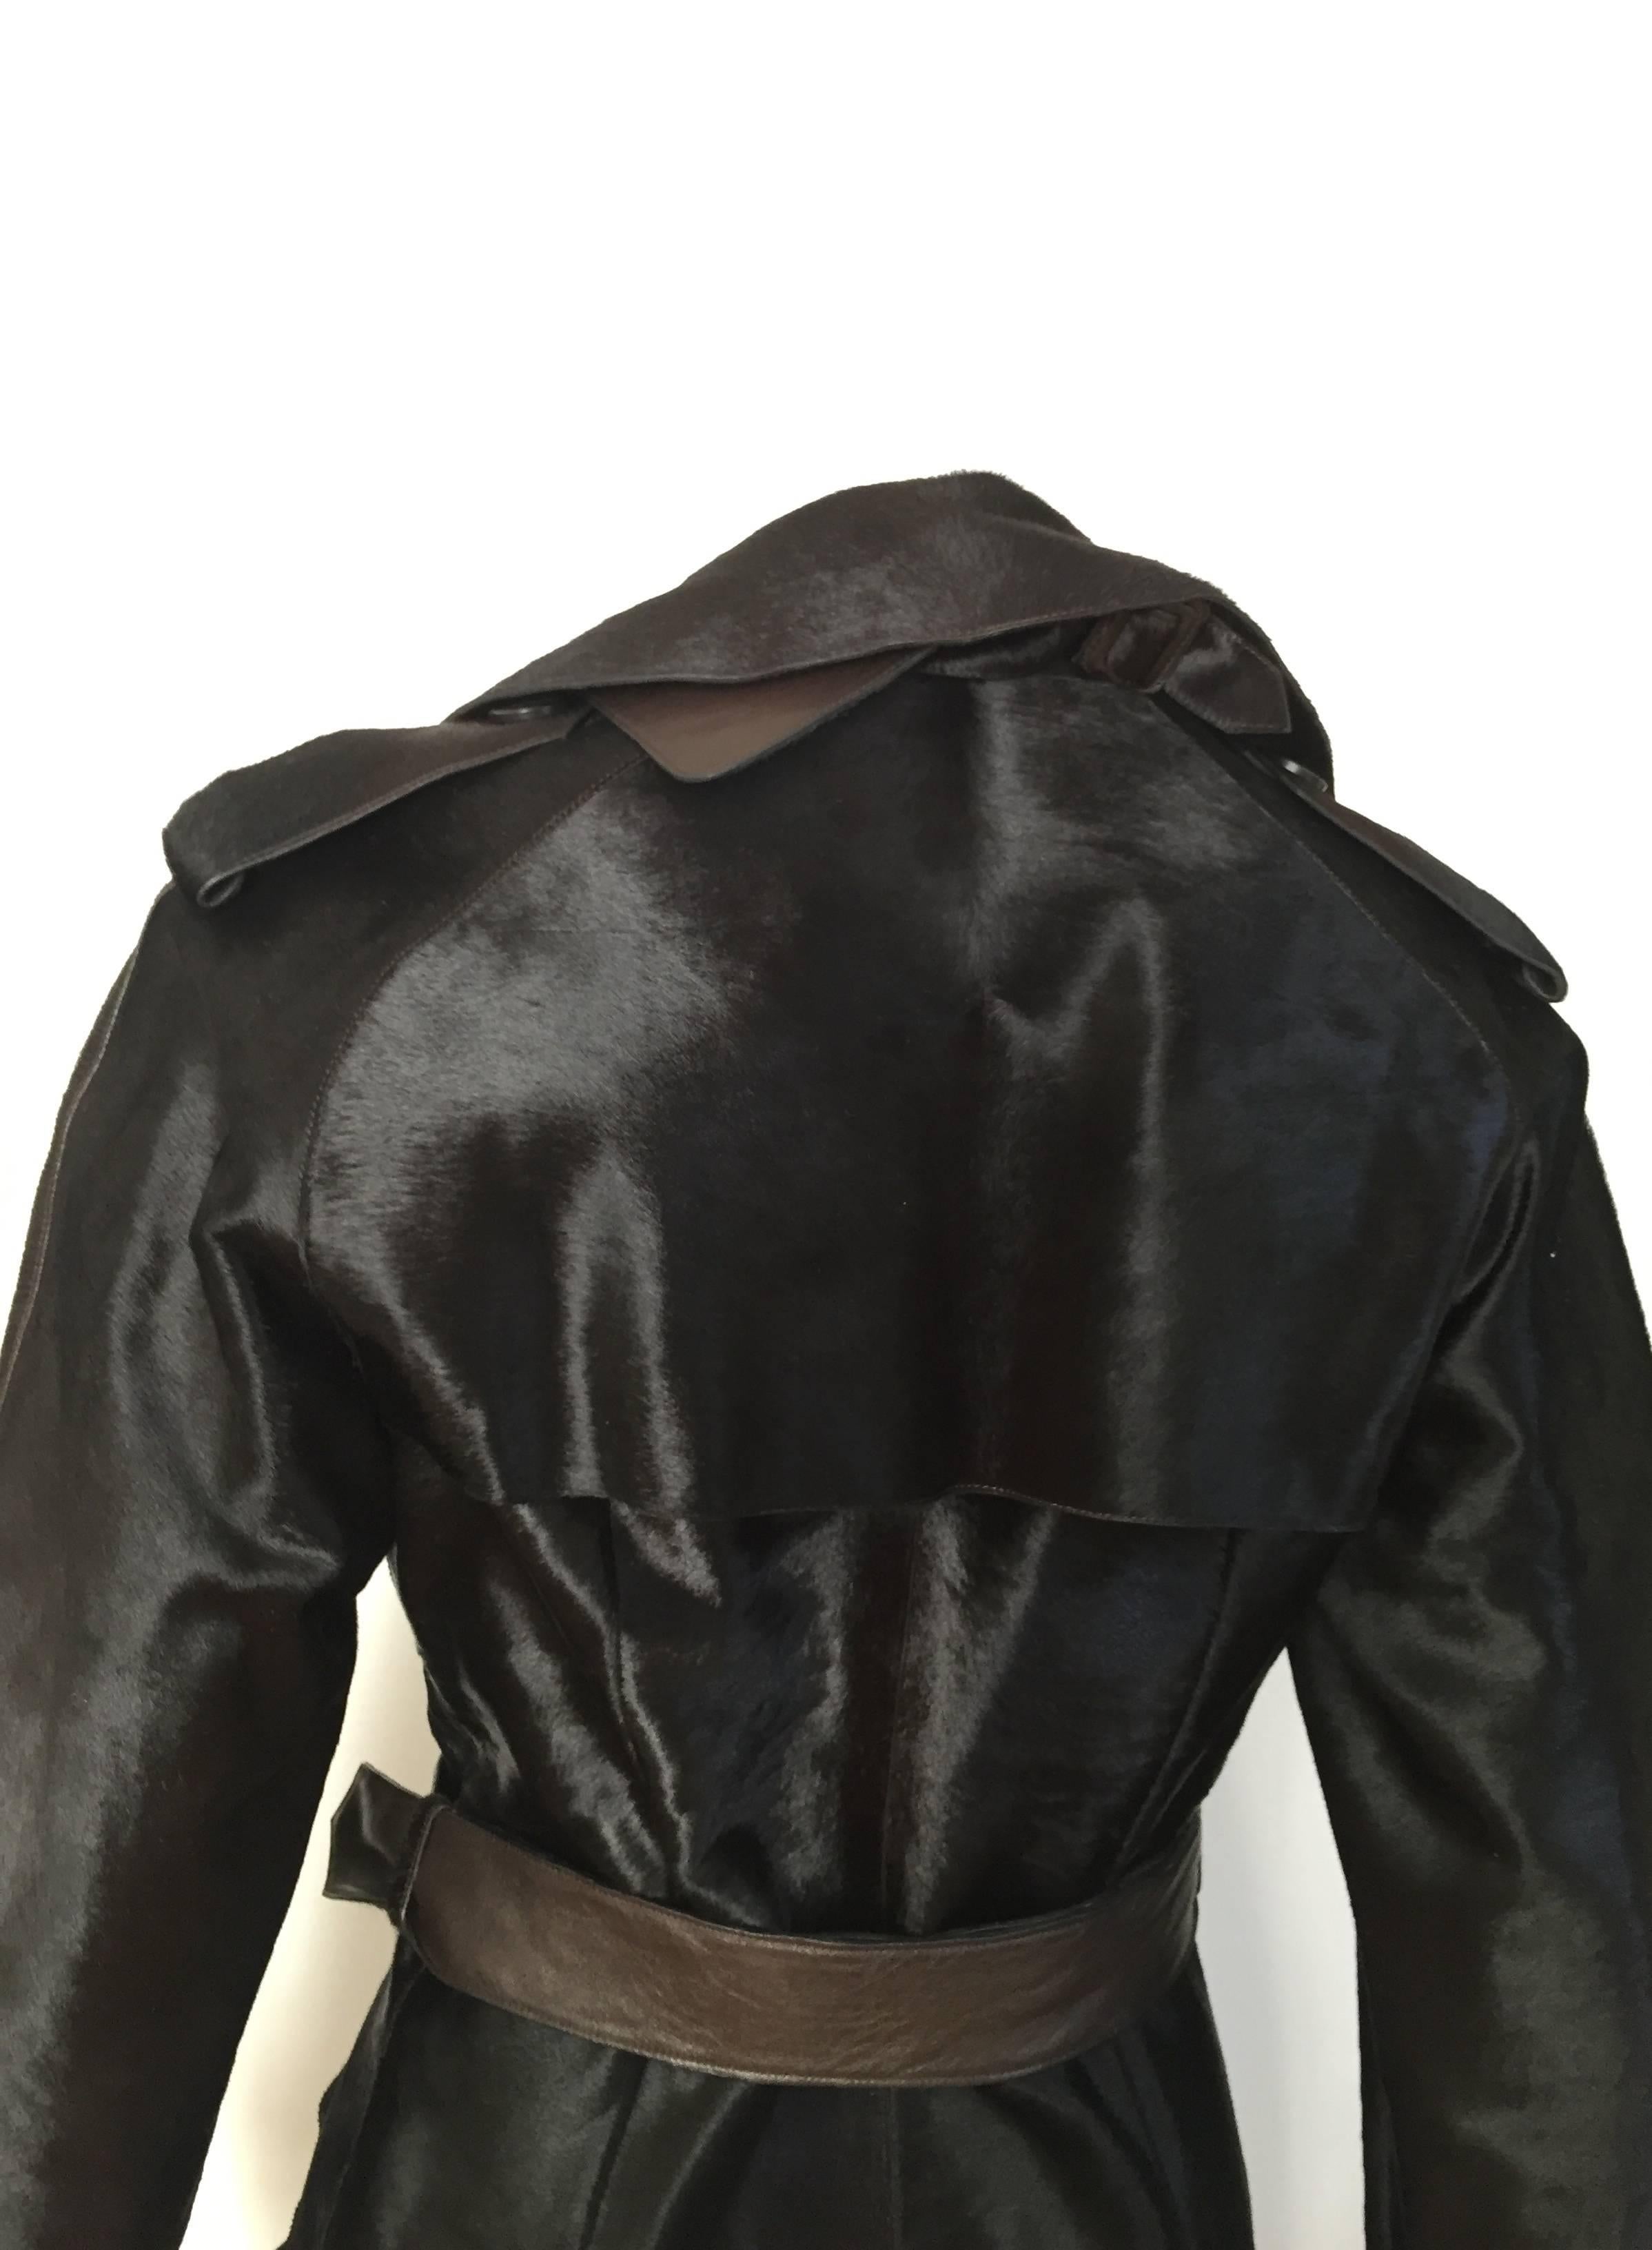 Hermes by Jean Paul Gaultier 2004 brown calf skin trench coat size 6. For Sale 1